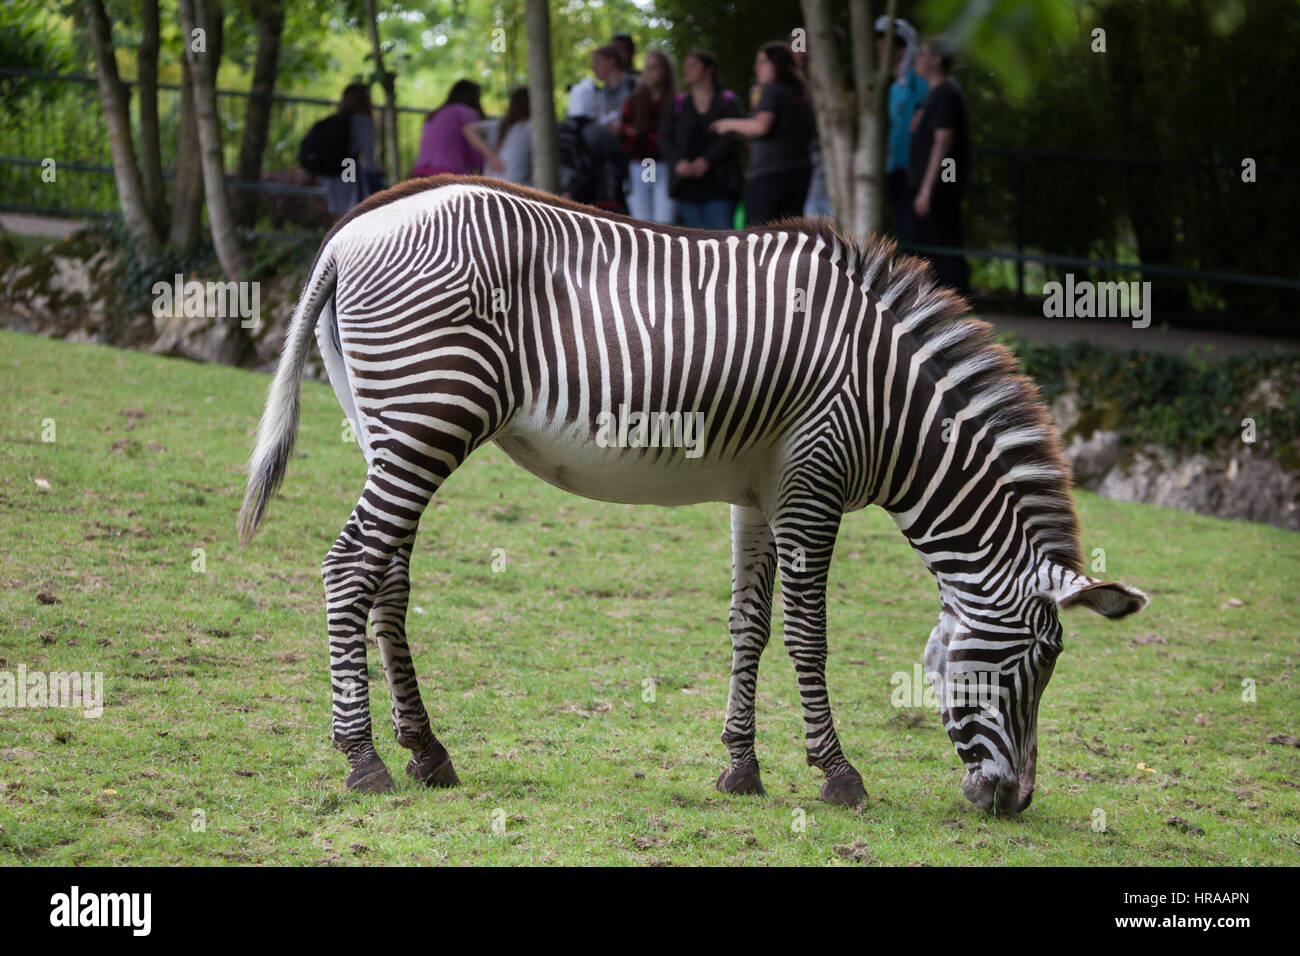 Grevy's zebra (Equus grevyi), also known as the imperial zebra at Beauval Zoo in Saint-Aignan sur Cher, Loir-et-Cher, France. Stock Photo